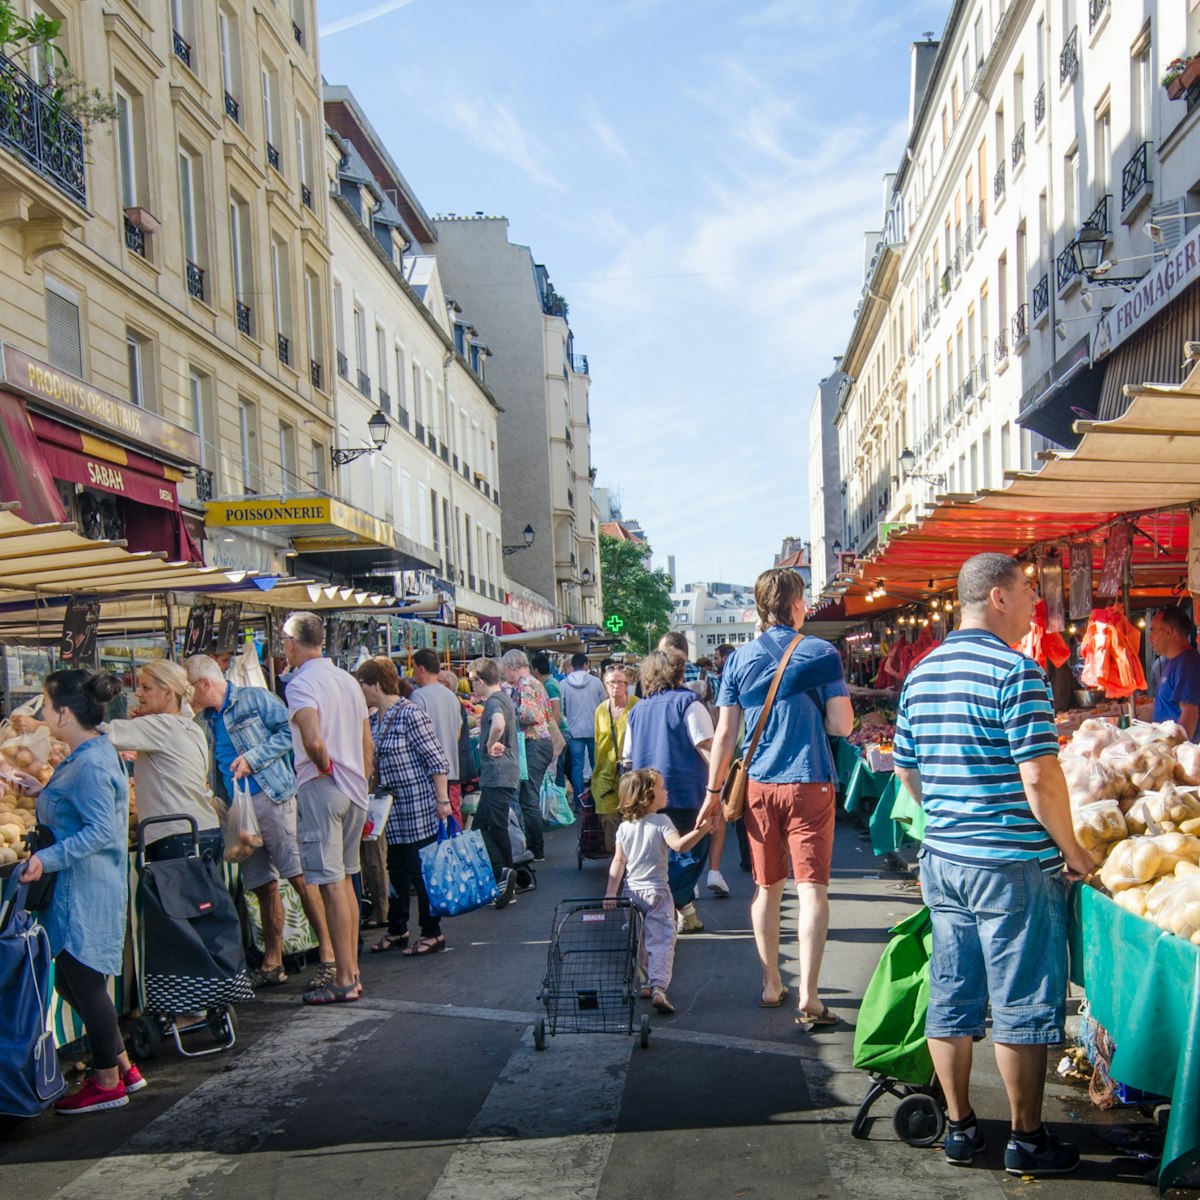 PARIS, FRANCE - AUGUST 29, 2015: The open-air market in the Bastille district is one of the largest and busiest in the city selling fresh produce from France and other European countries. ; Shutterstock ID 318453461; Your name (First / Last): redownload; GL account no.: redownload; Netsuite department name: redownload; Full Product or Project name including edition: redownload